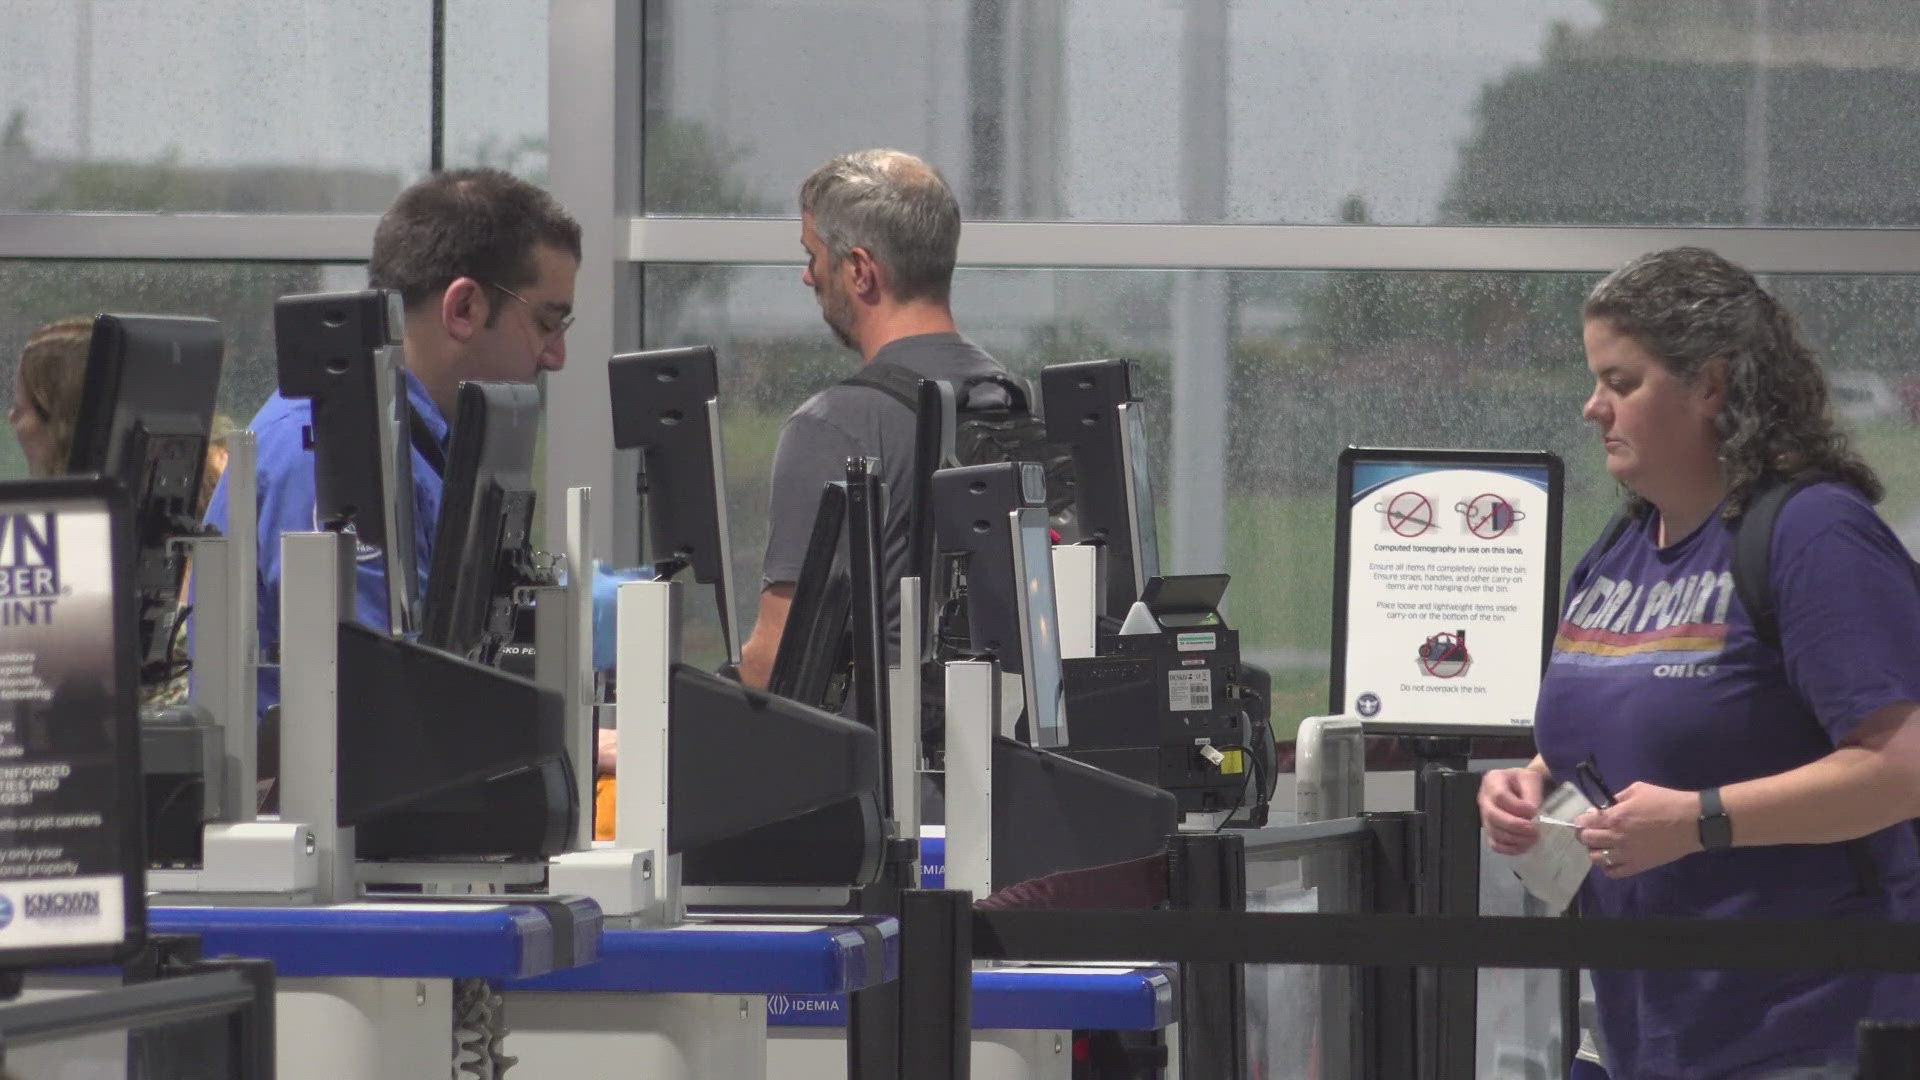 TSA uses machines to match traveler’s faces to their IDs.